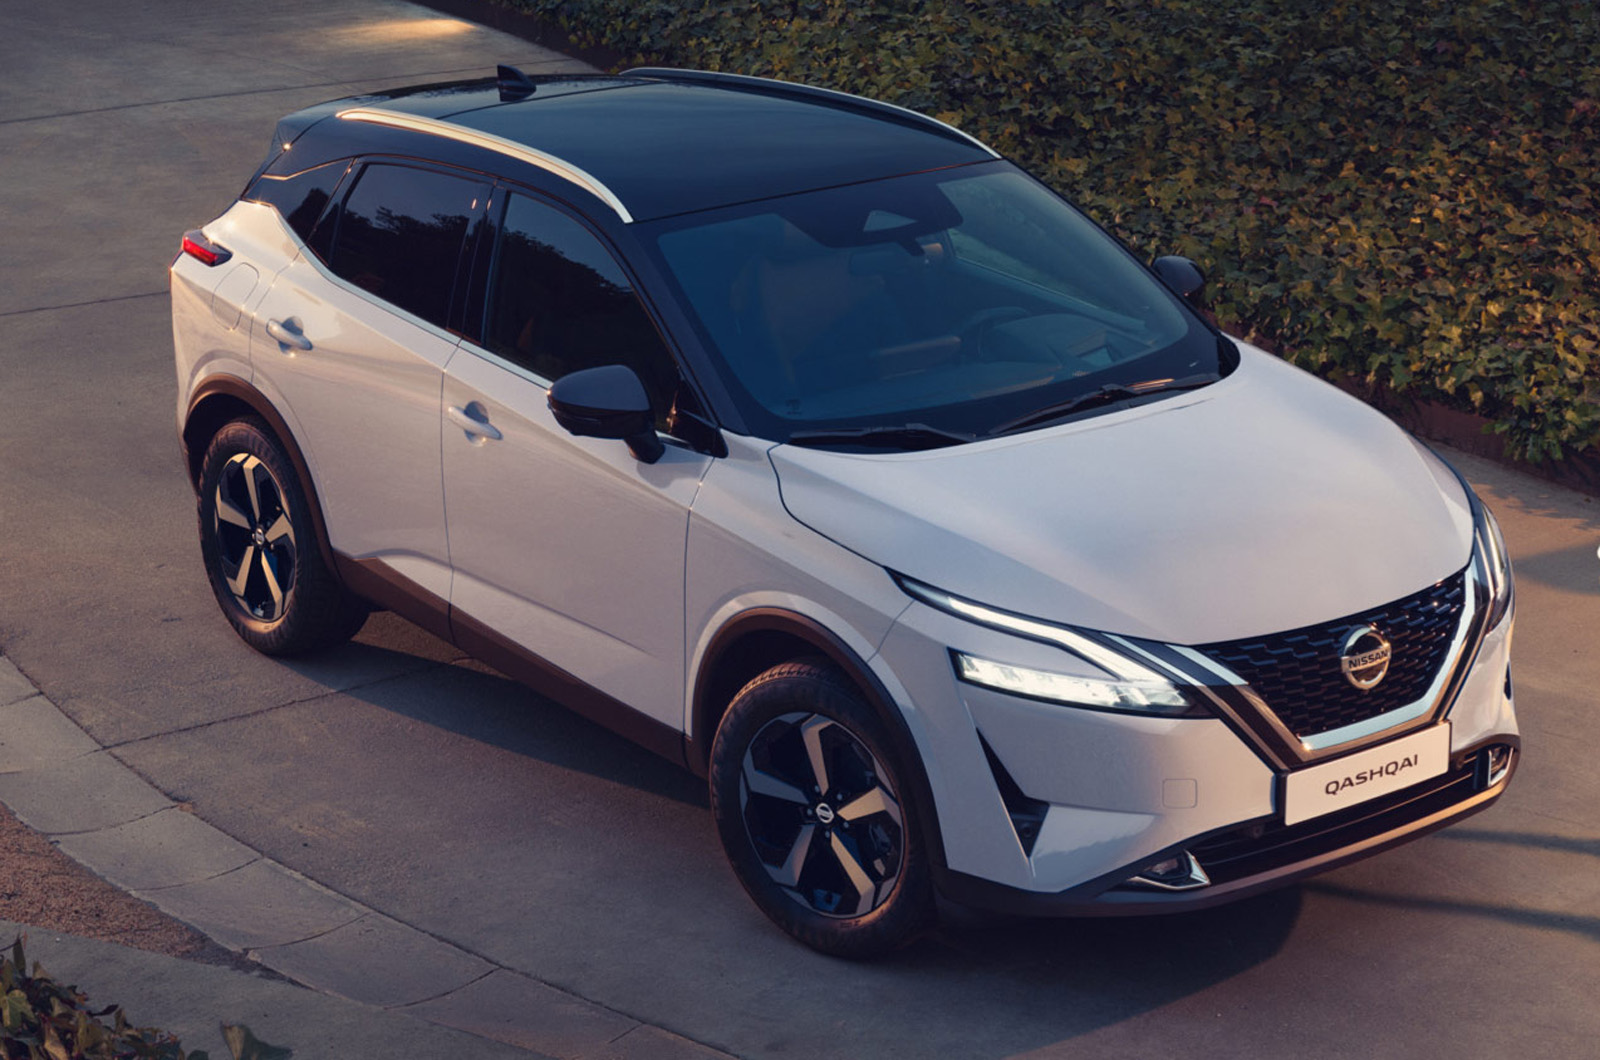 All-new Nissan Qashqai: 2021's new crossover in detail